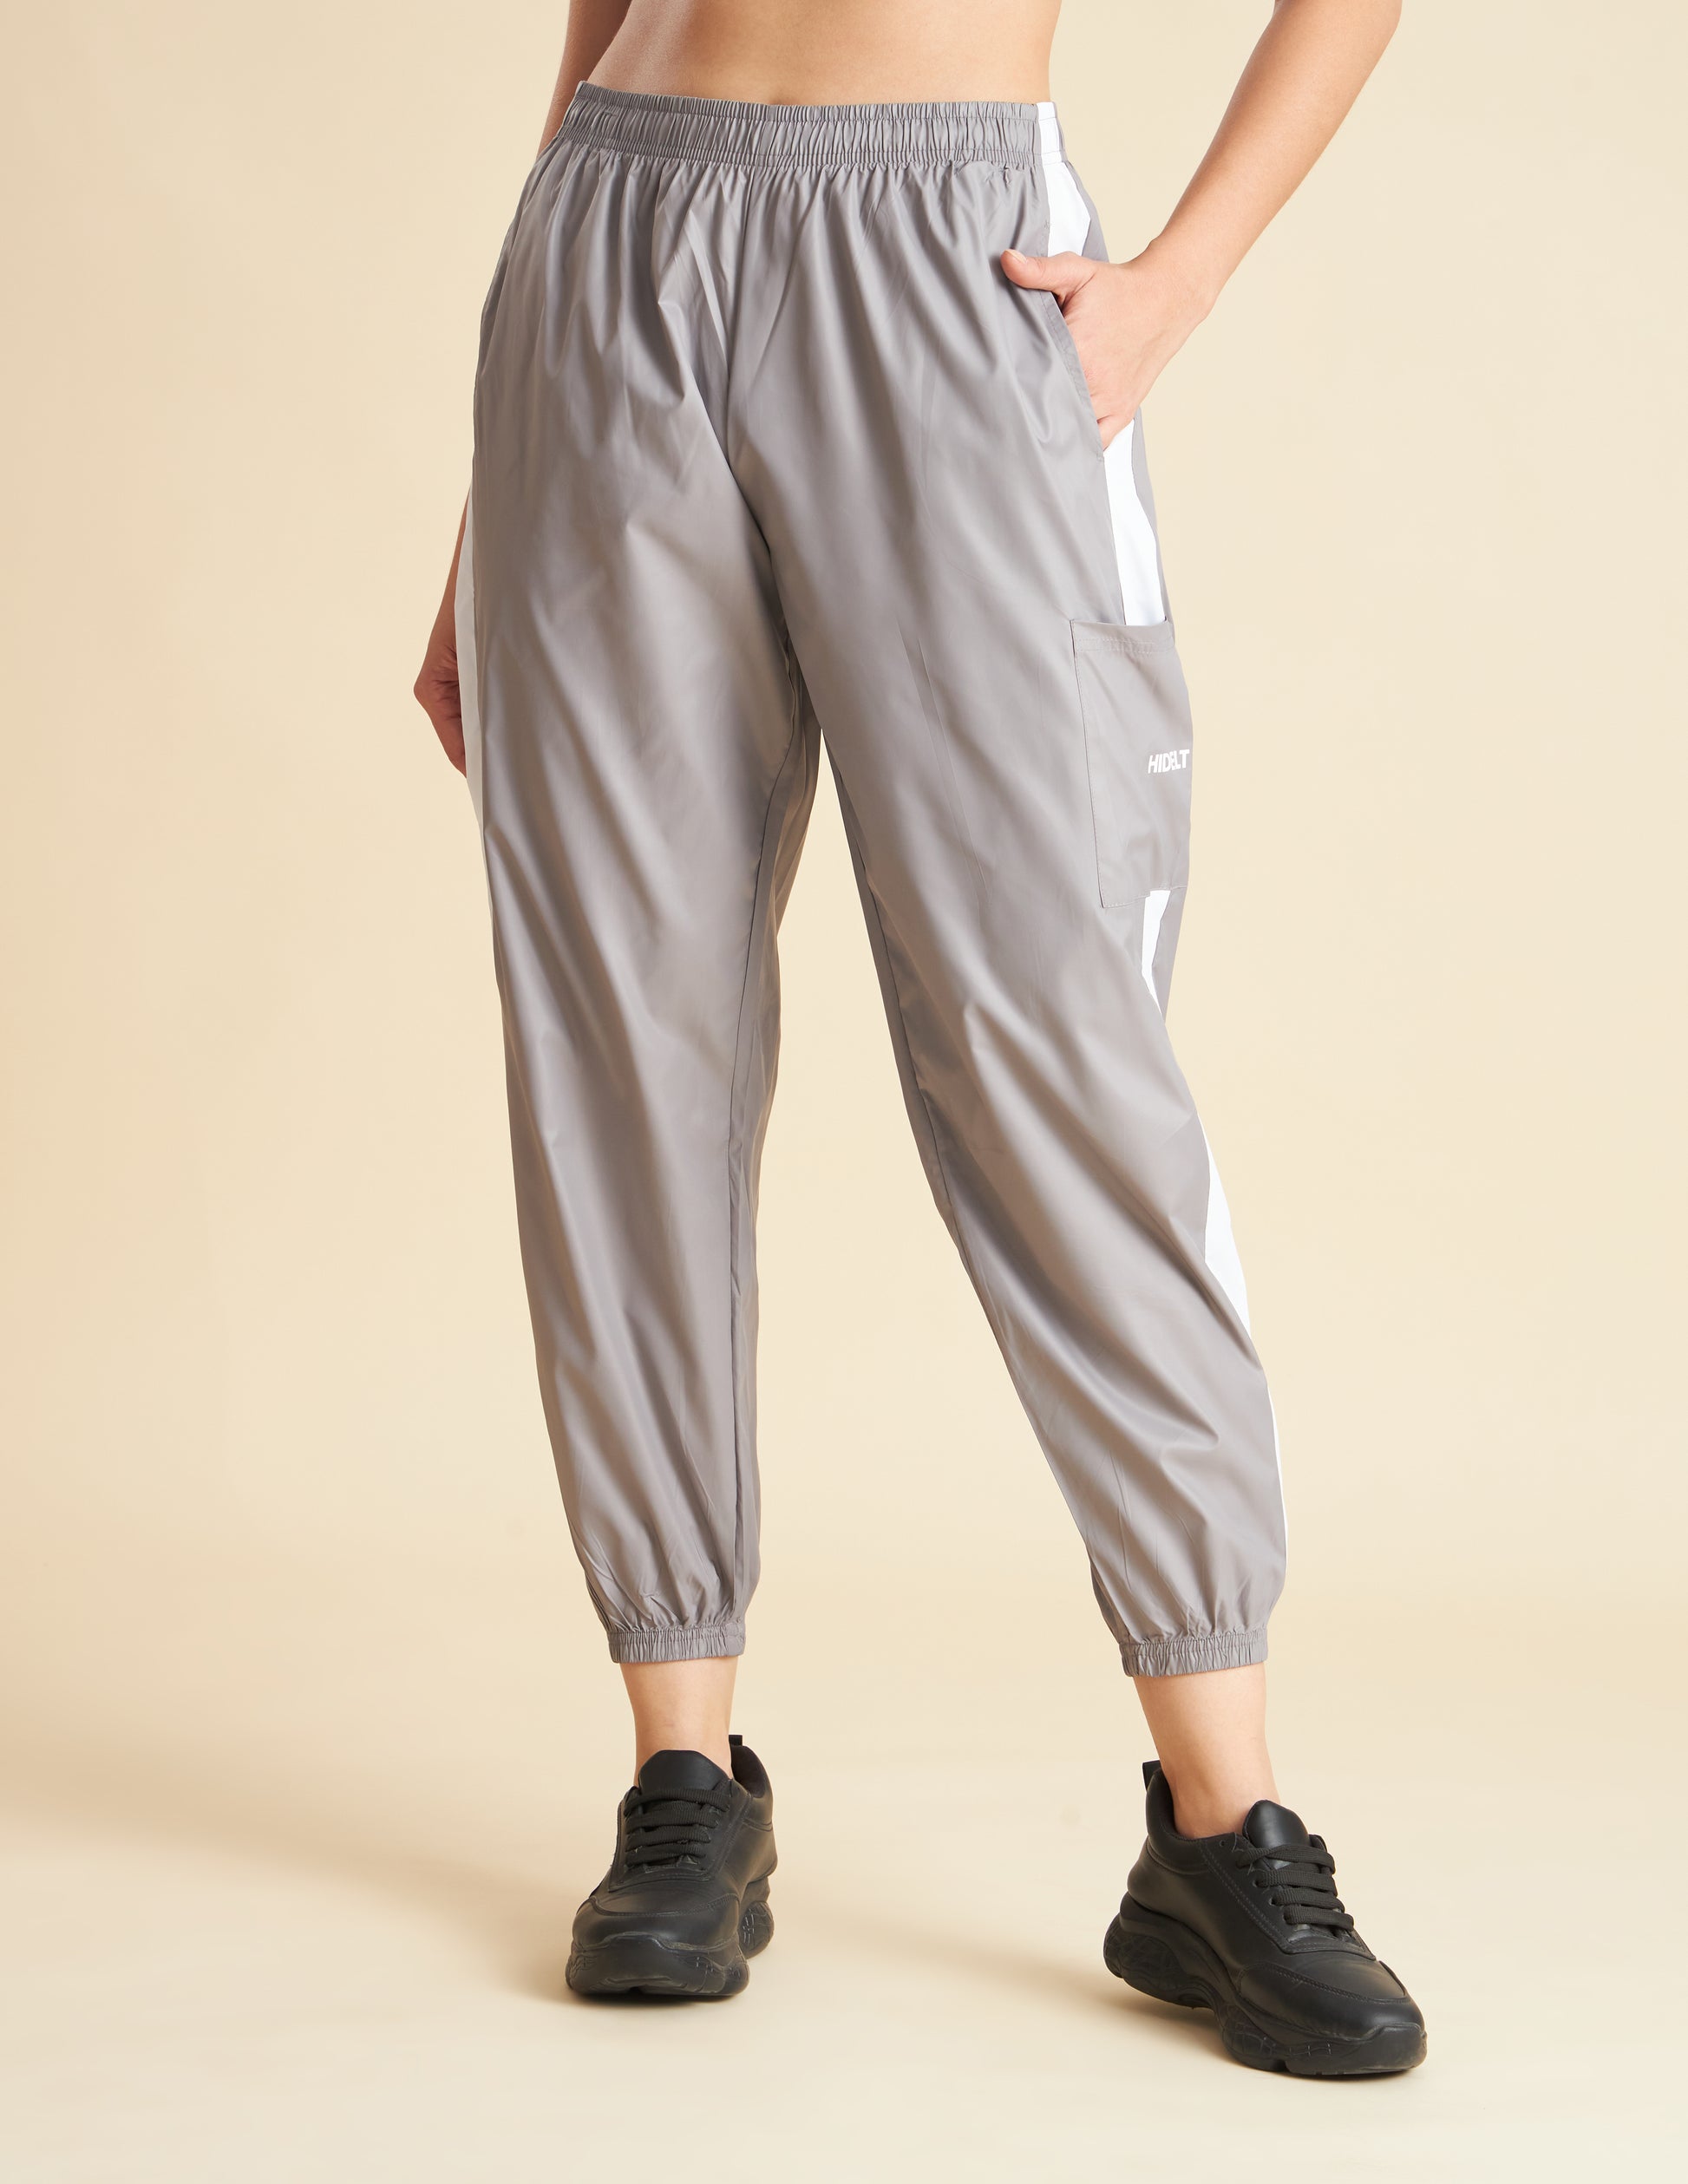 loose track pants for ladies| womens track pants with pockets| best track  pants for women – OVERLOCK